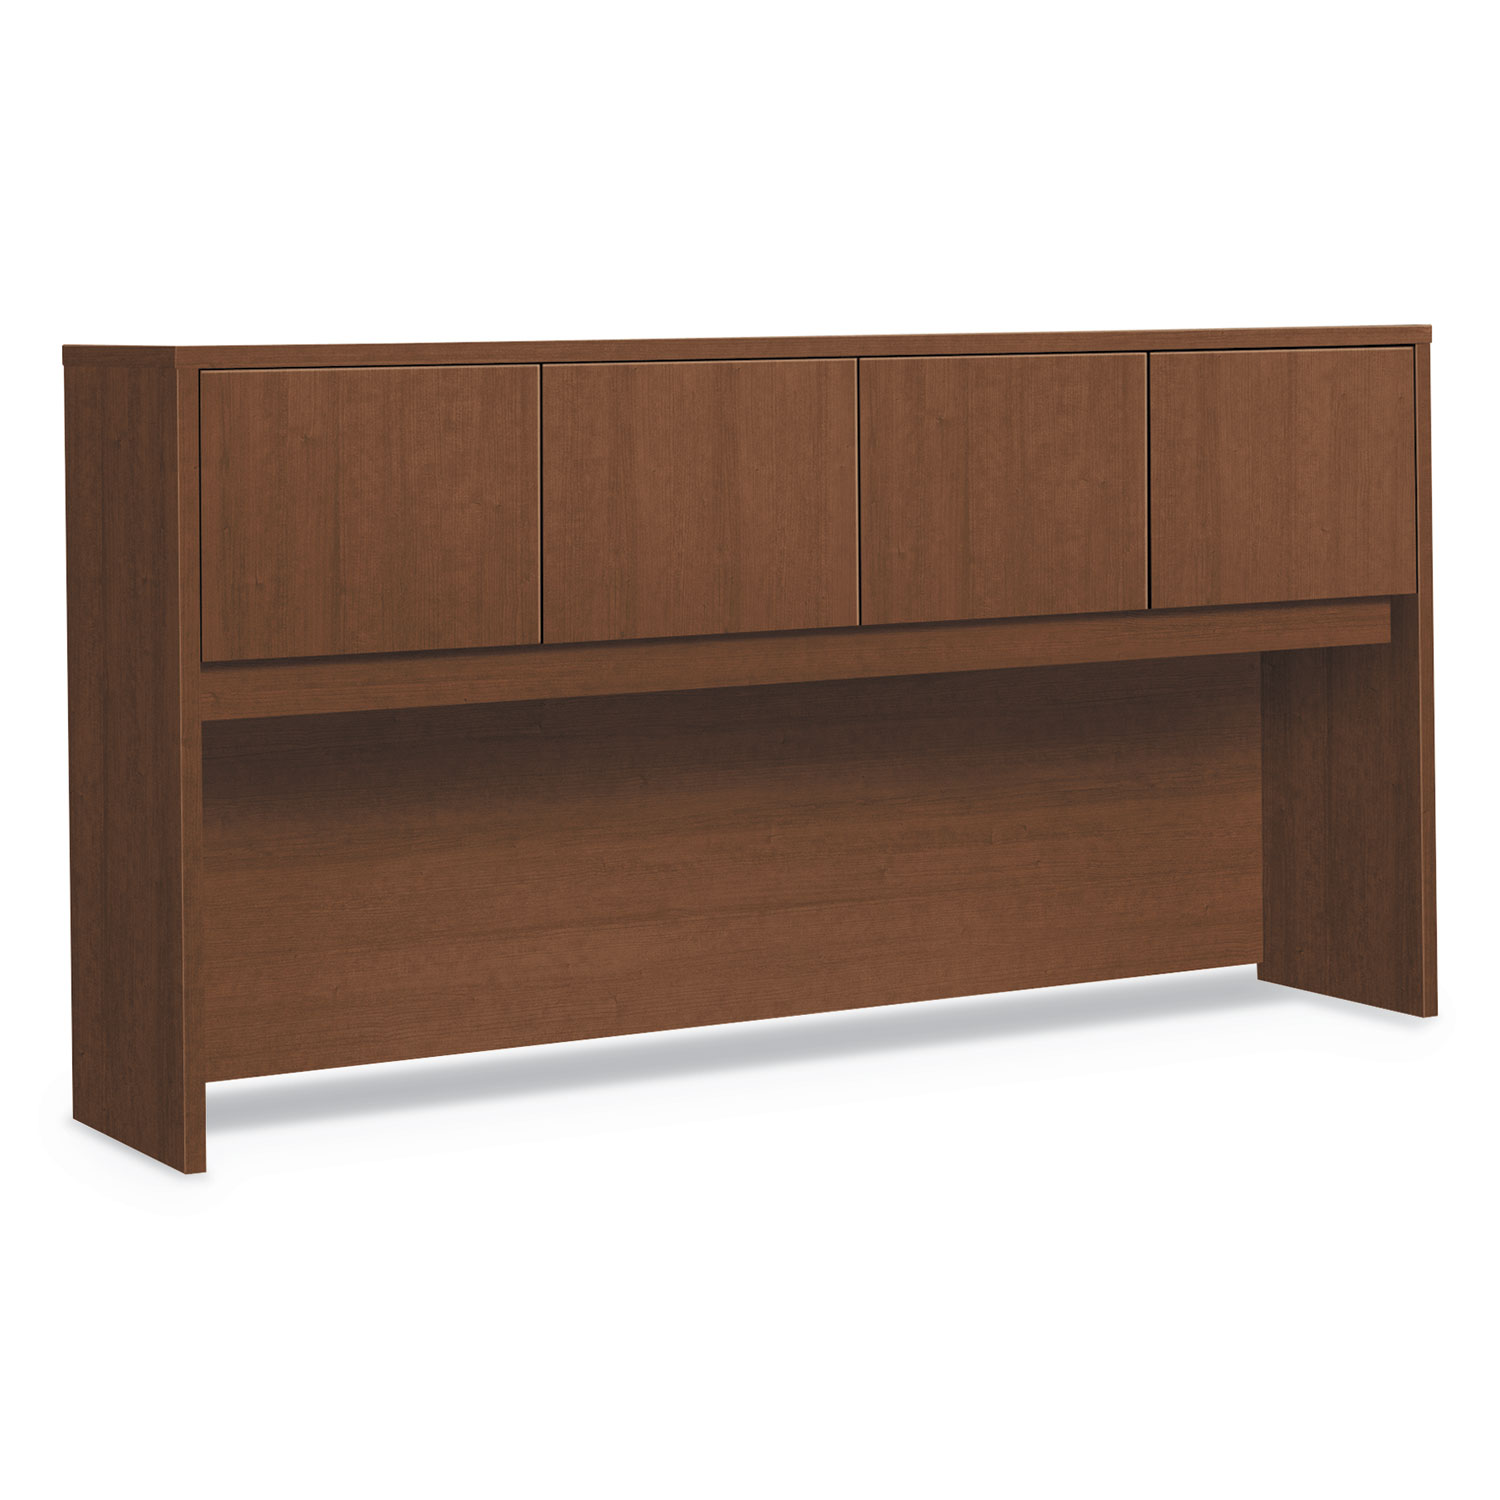 Foundation Hutch with Doors, Compartment, 72w x 14.63d x 37.13h, Shaker Cherry